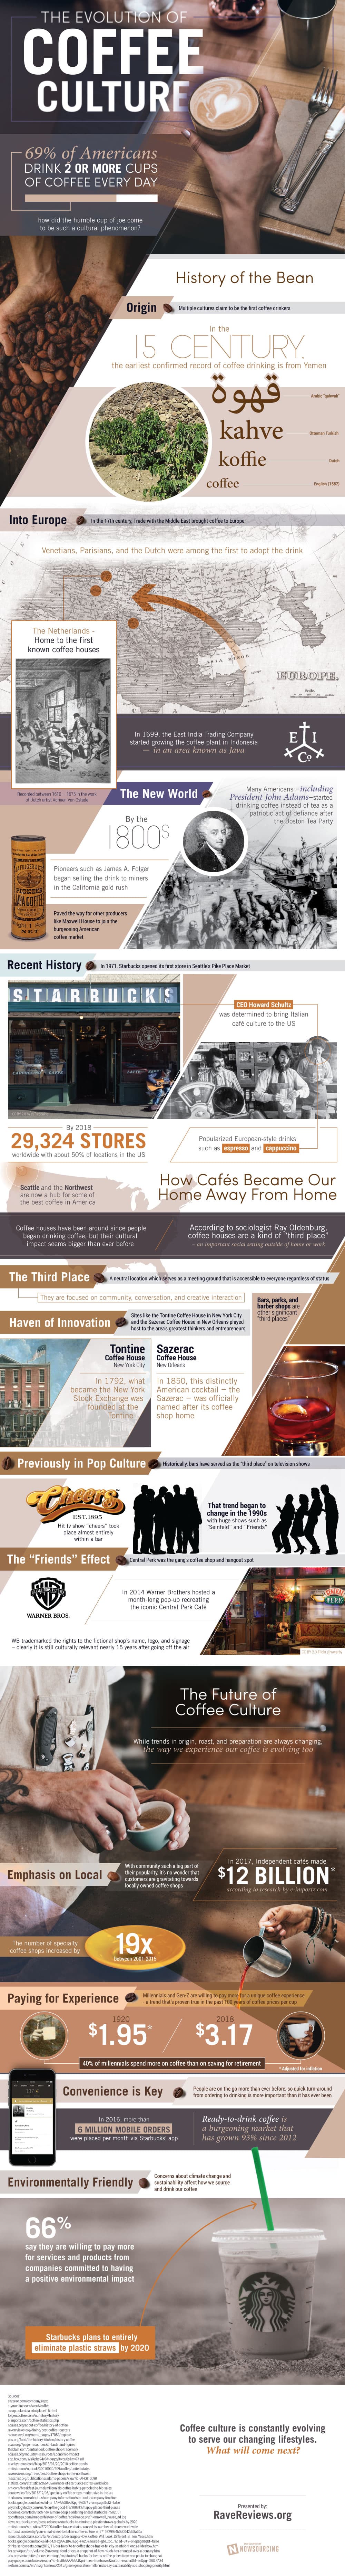 The Evolution of Coffee Culture Infographic